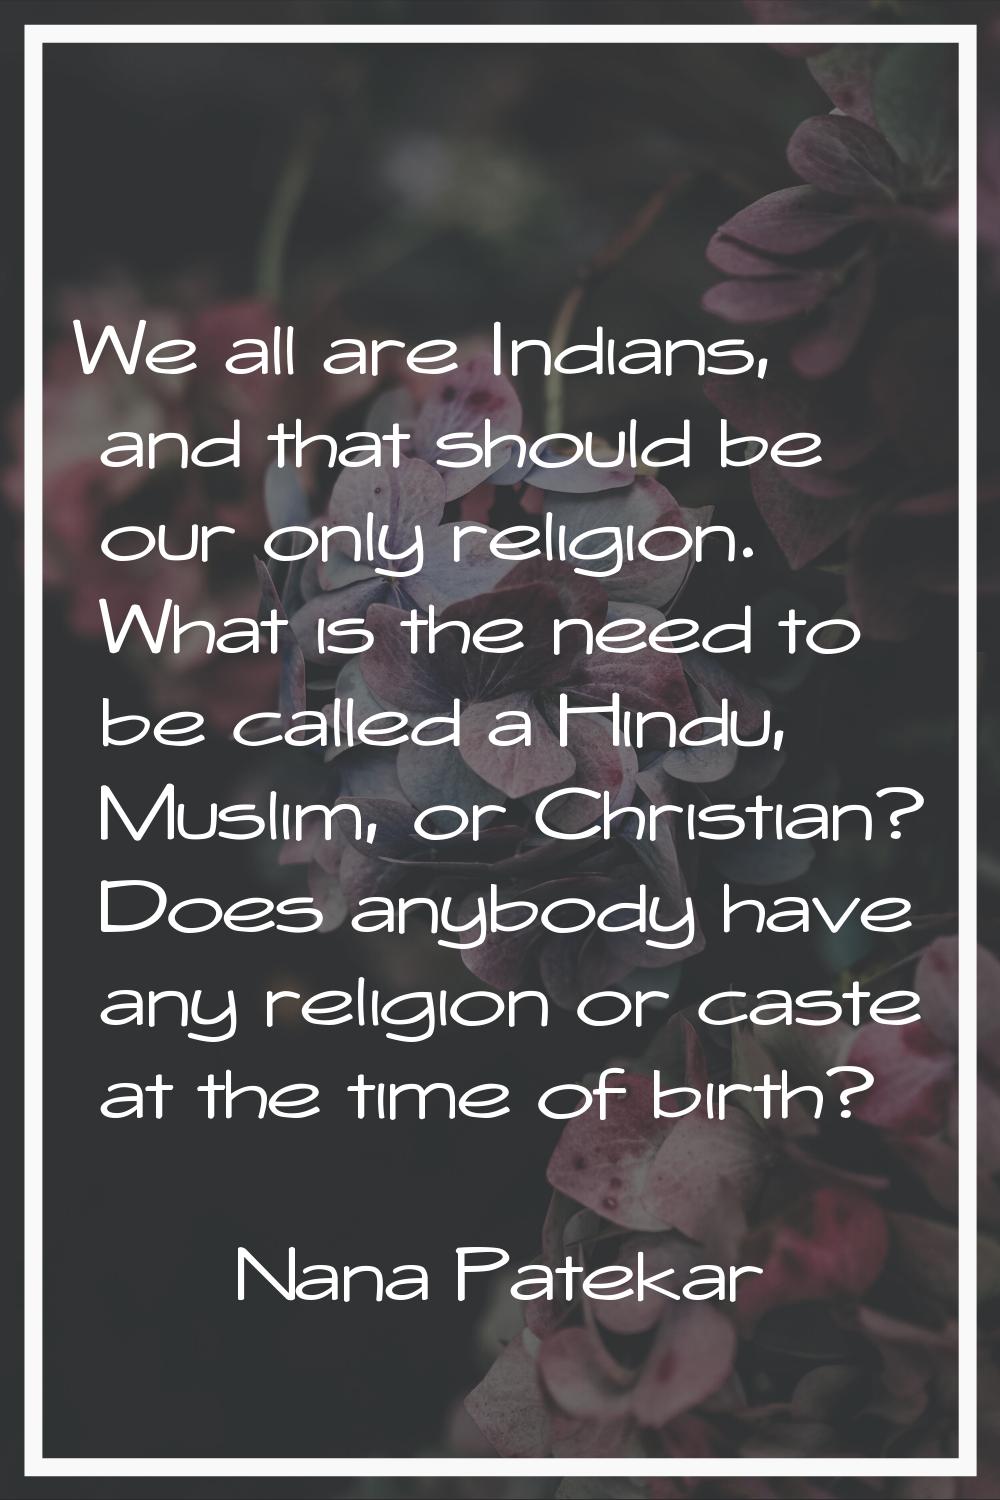 We all are Indians, and that should be our only religion. What is the need to be called a Hindu, Mu